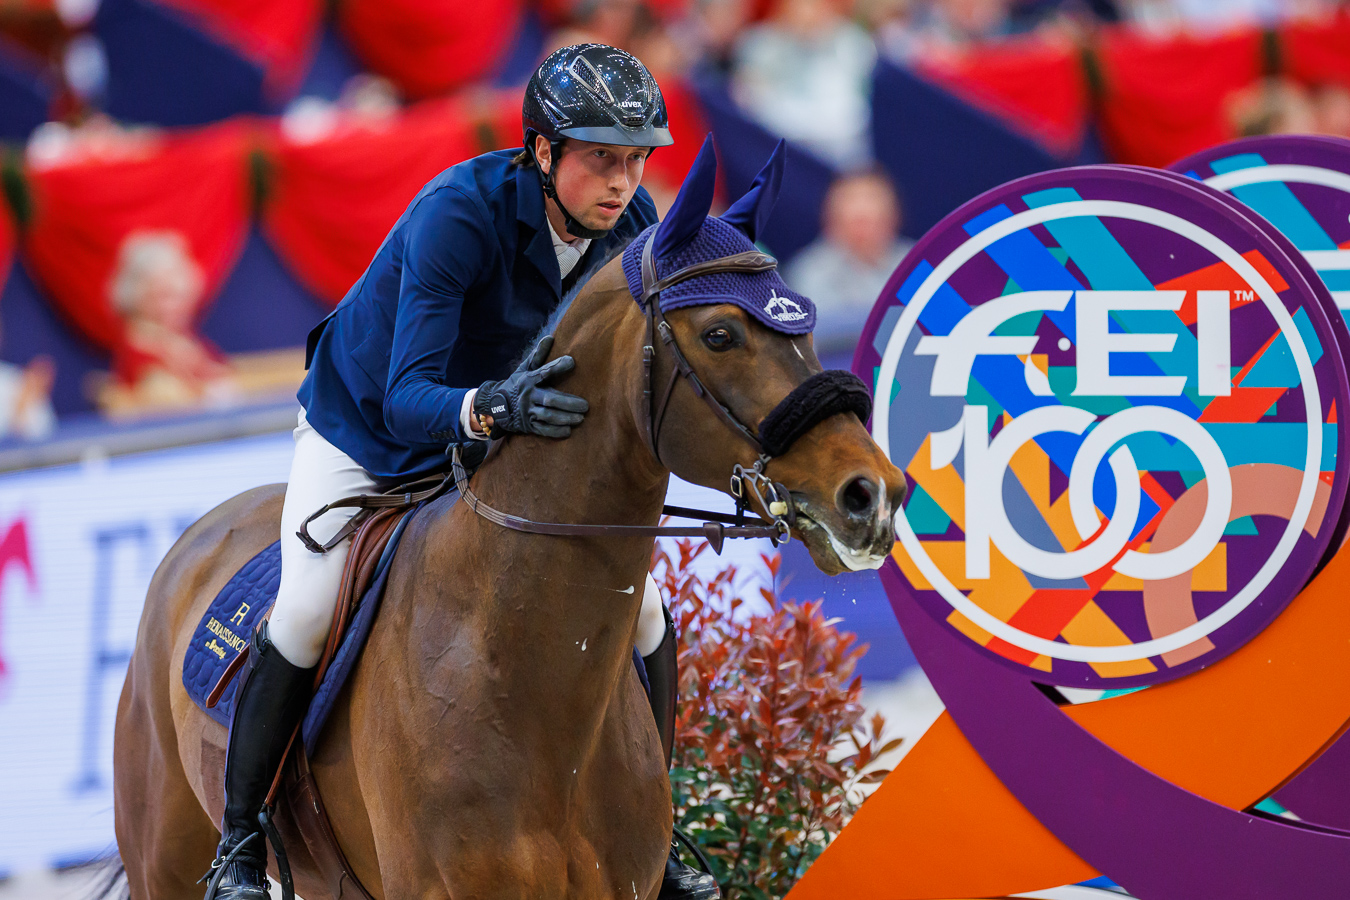 Martin Fuchs remains on top of FEI Longines Ranking